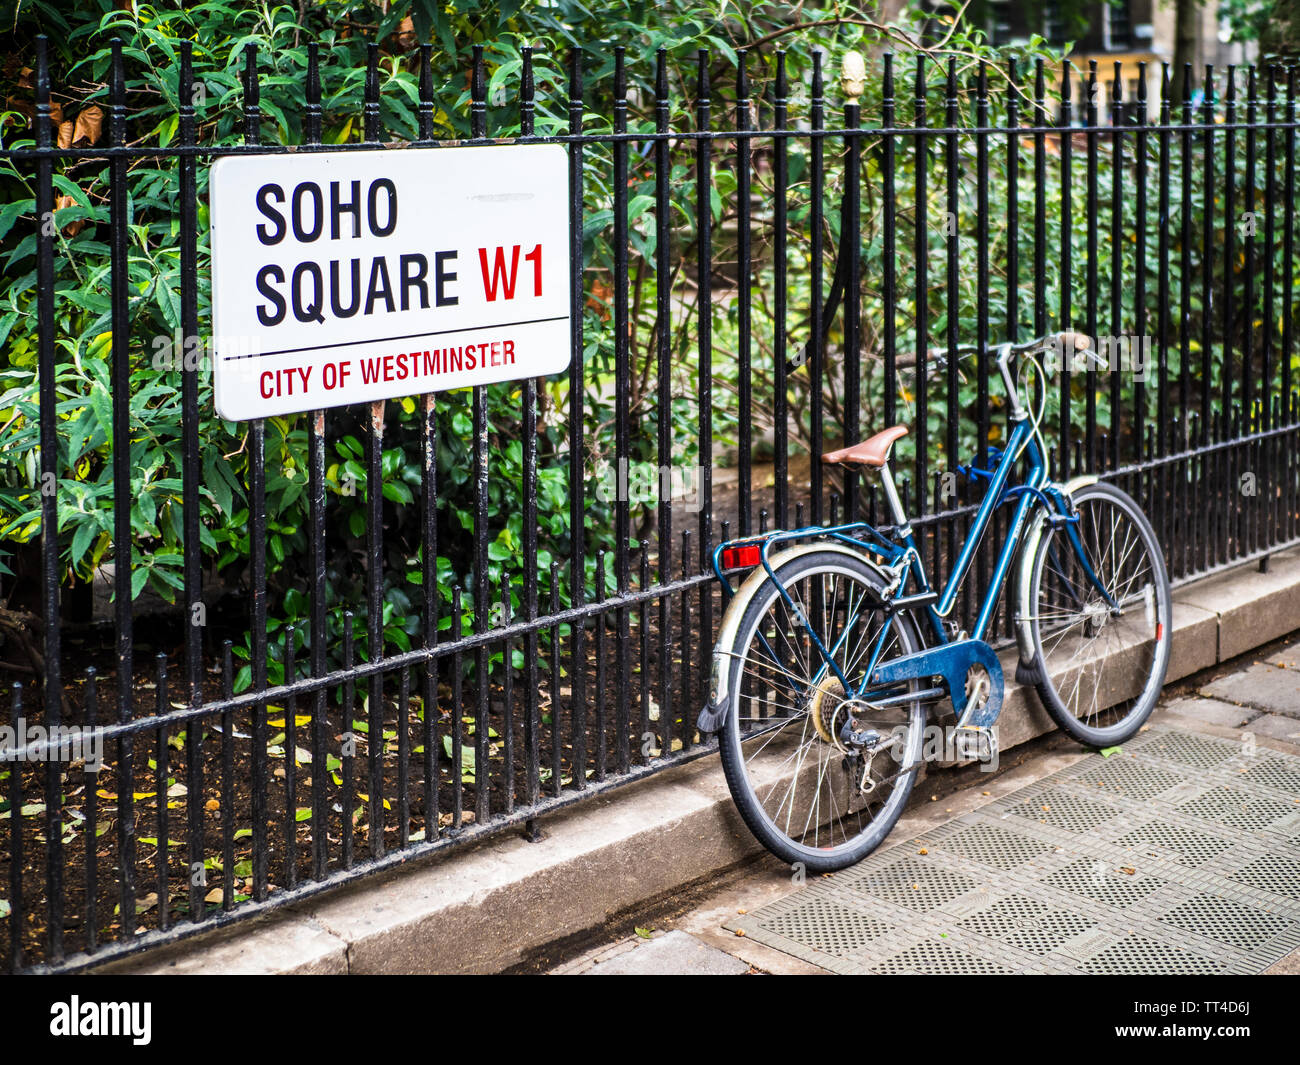 Soho Square W1 -  Soho Square is a green space in London's Soho Entertainment District dating back to 1681 - London's Soho district Street Signs Stock Photo